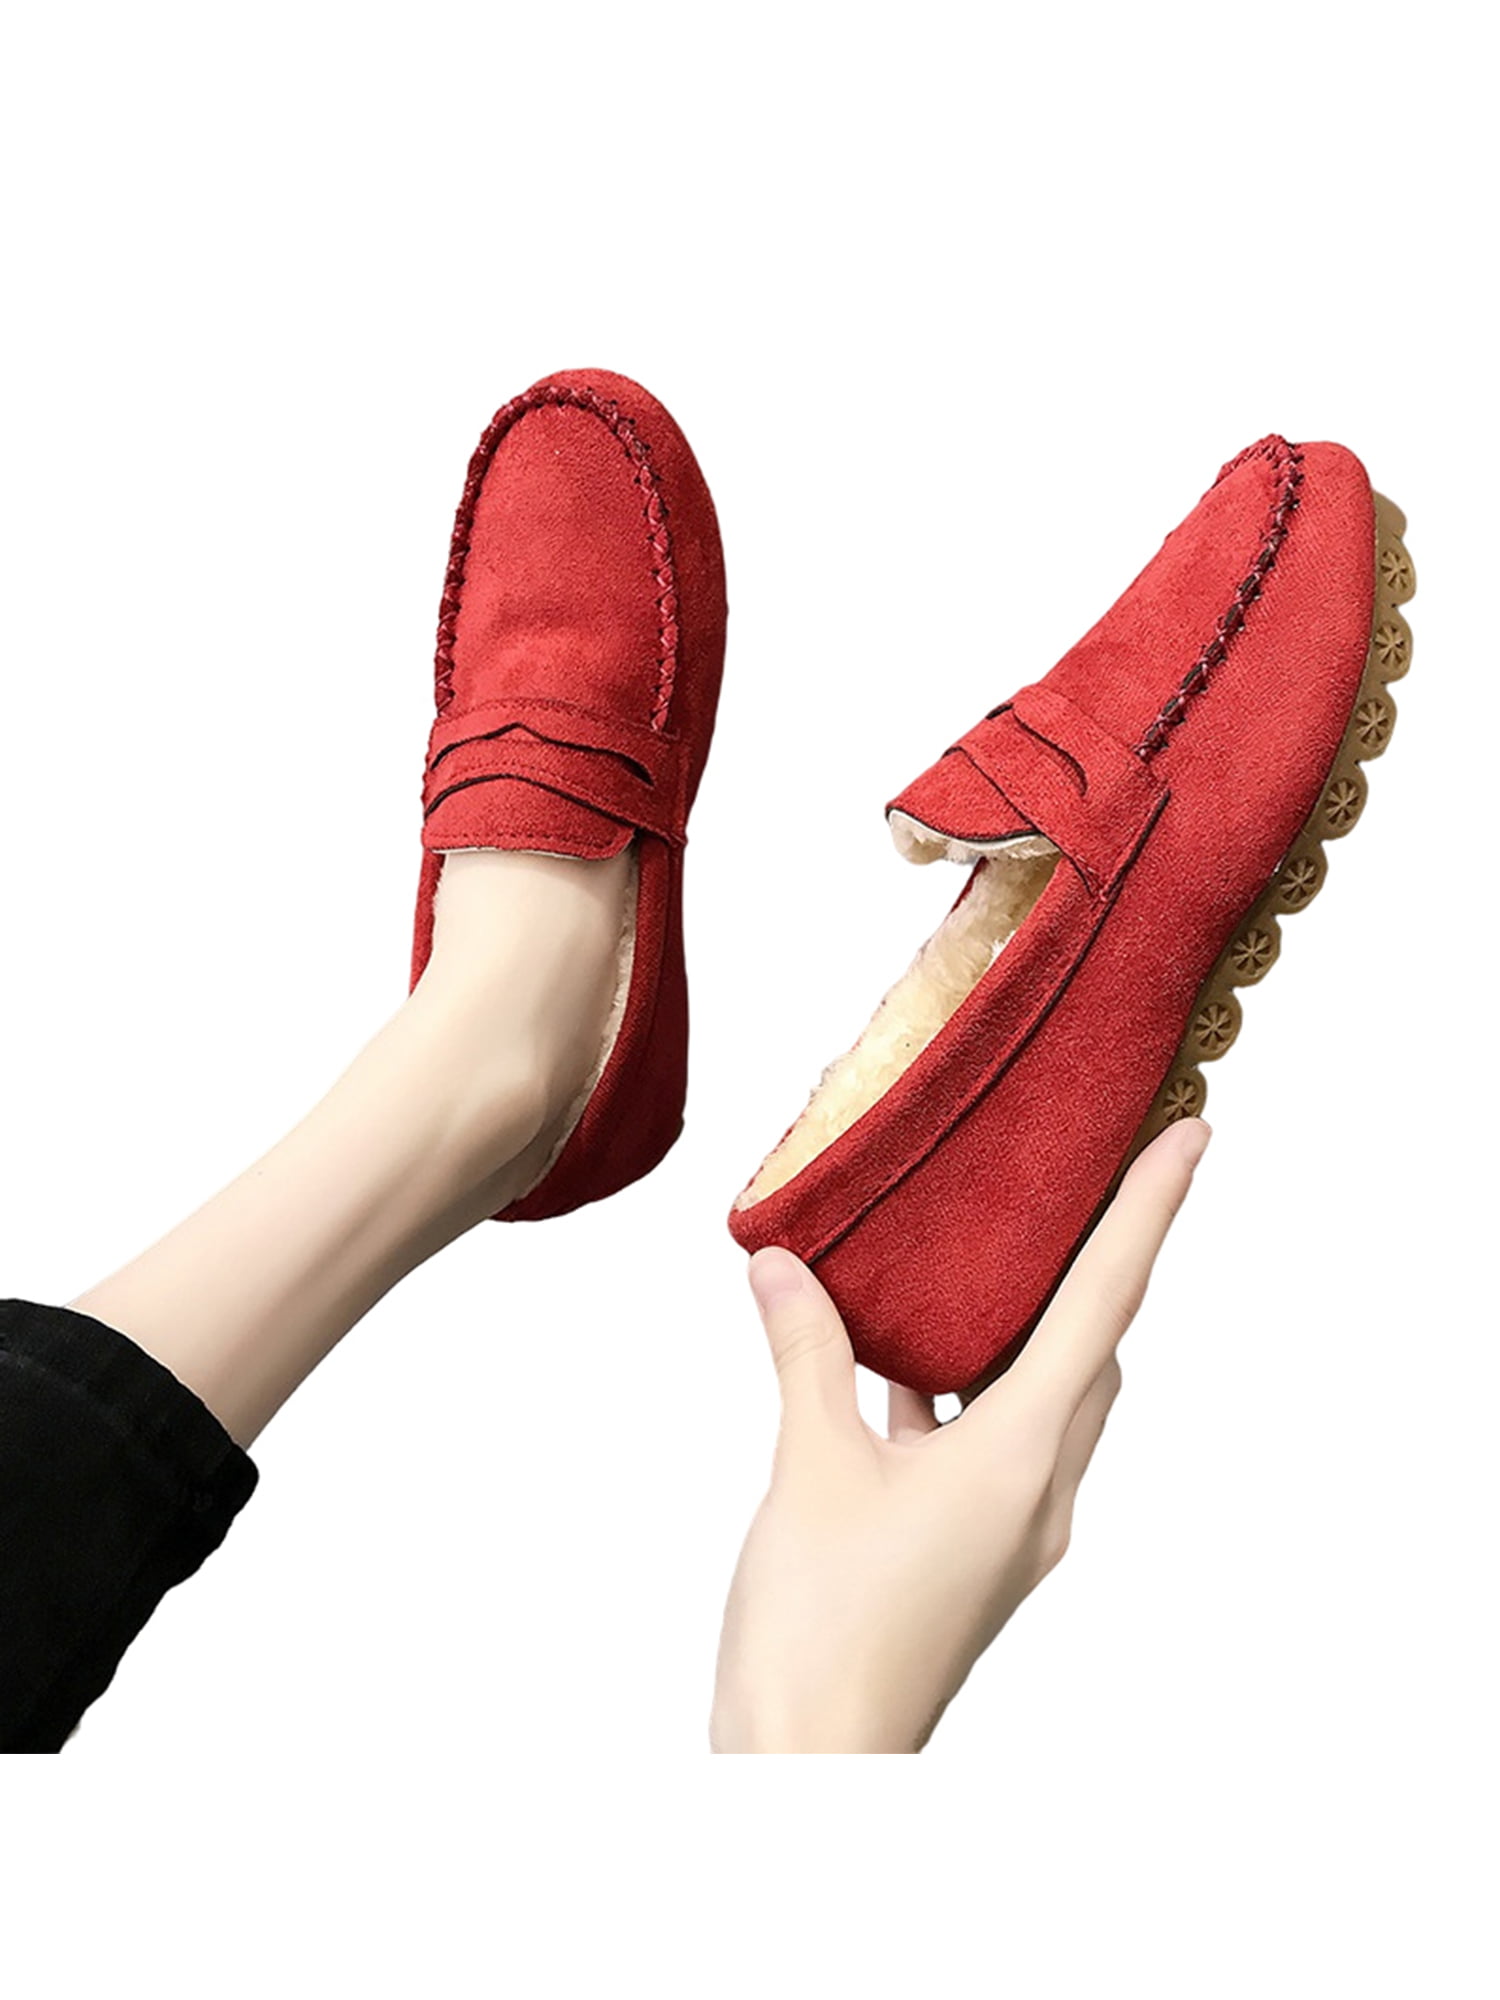 Womens Suede Faux Fur Slip On Slippers Soft Moccasin Toe Flat House Slippers 